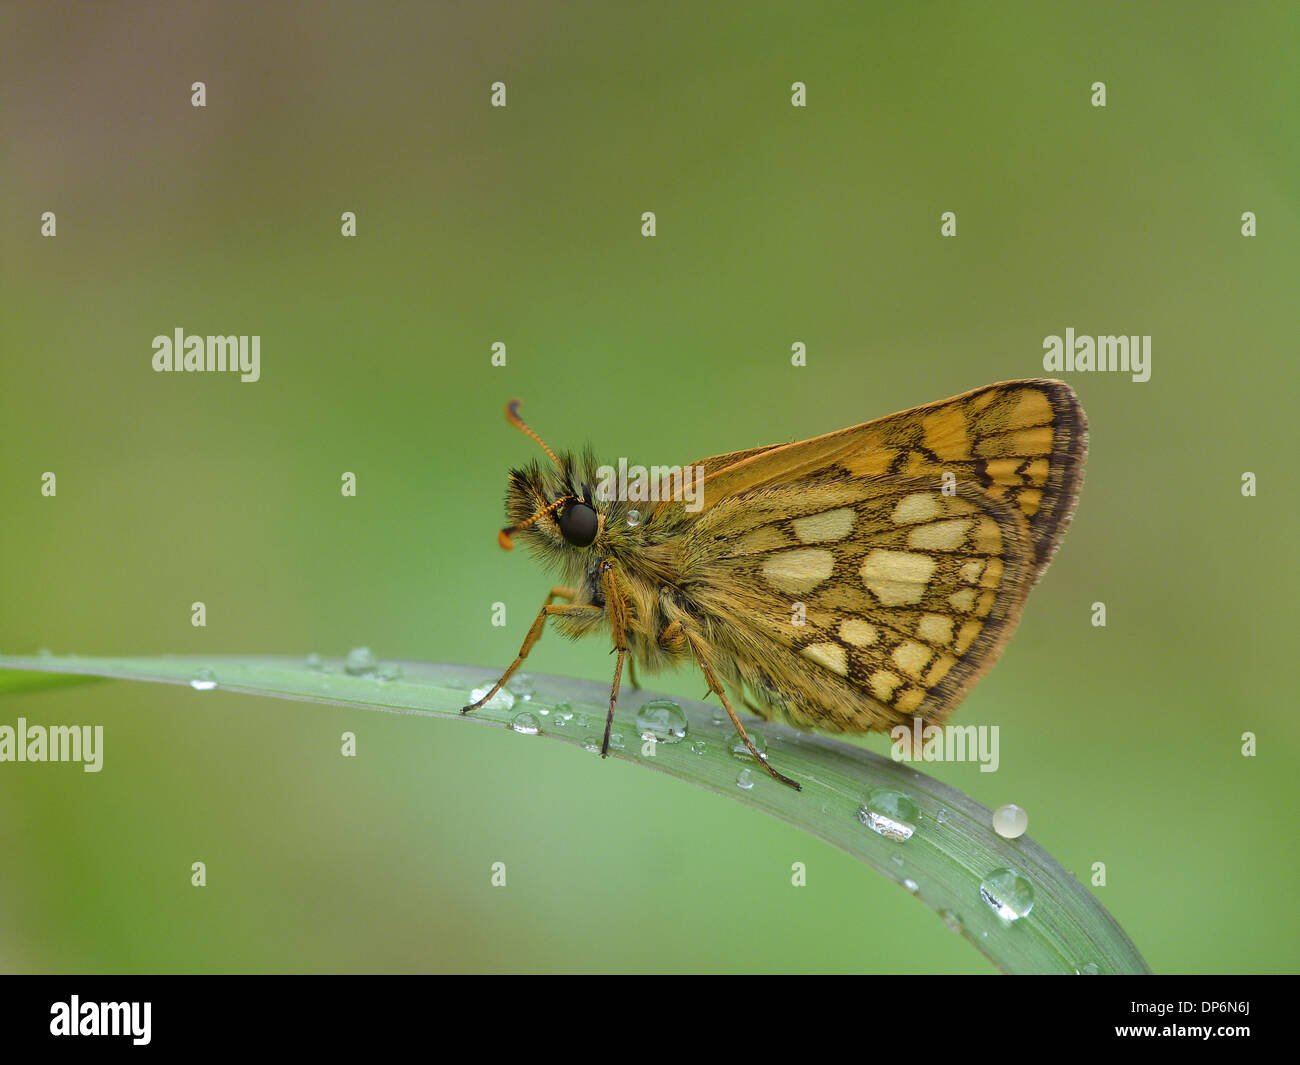 Chequered Skipper (Carterocephalus palaemon) adult male resting on grass leaf with early morning dew Dolomites Italian Alps Stock Photo